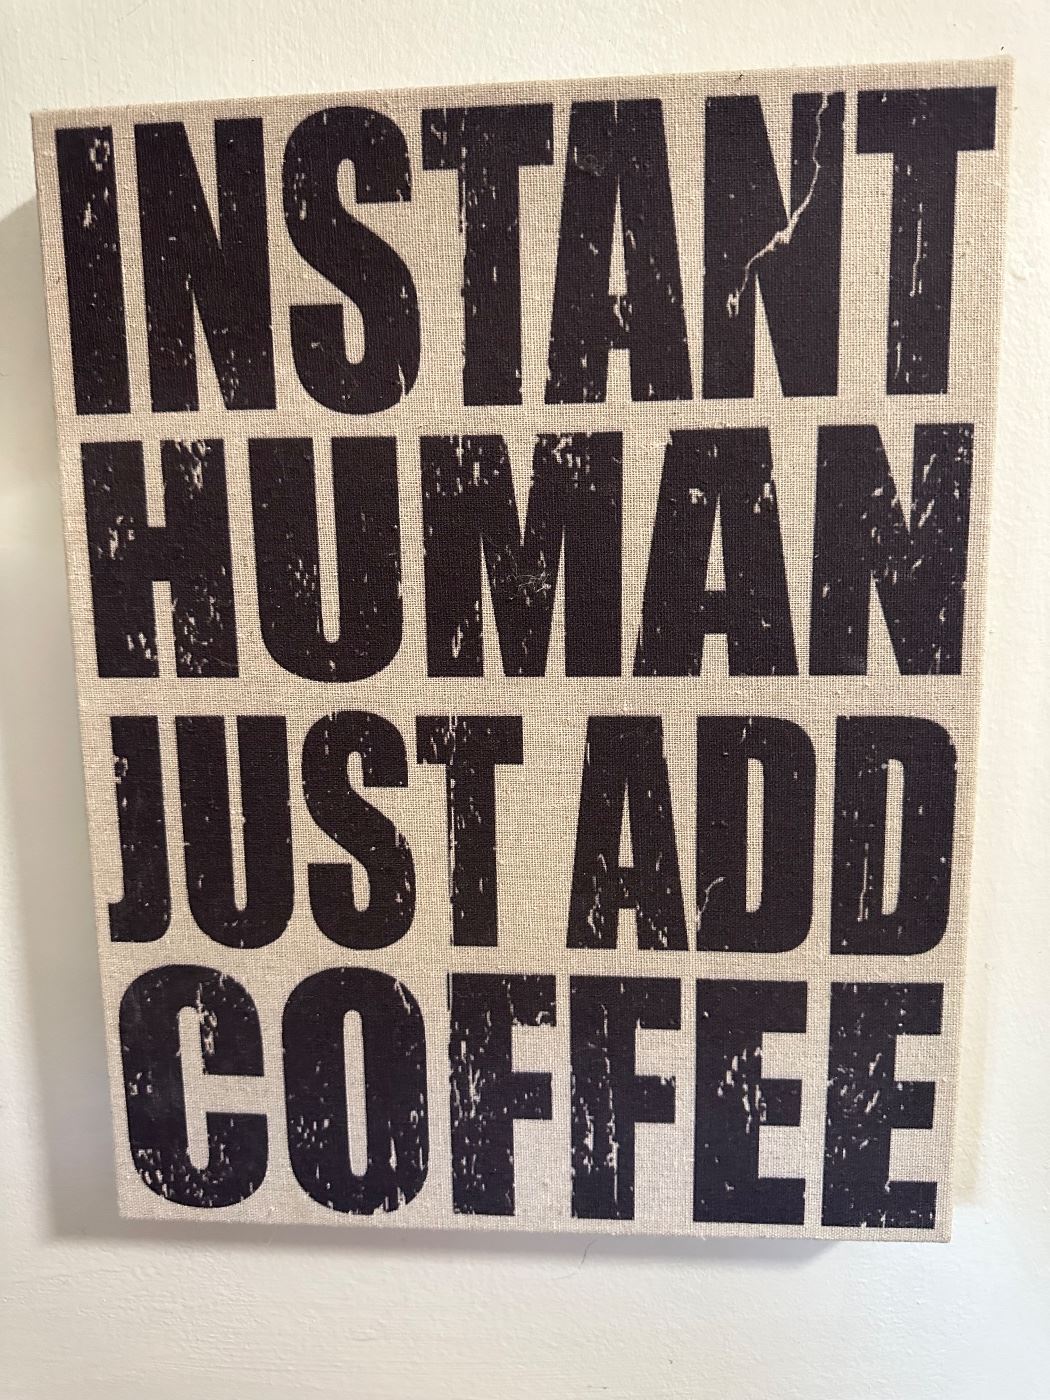 Instant Human Just add Coffee and bring an extra for me